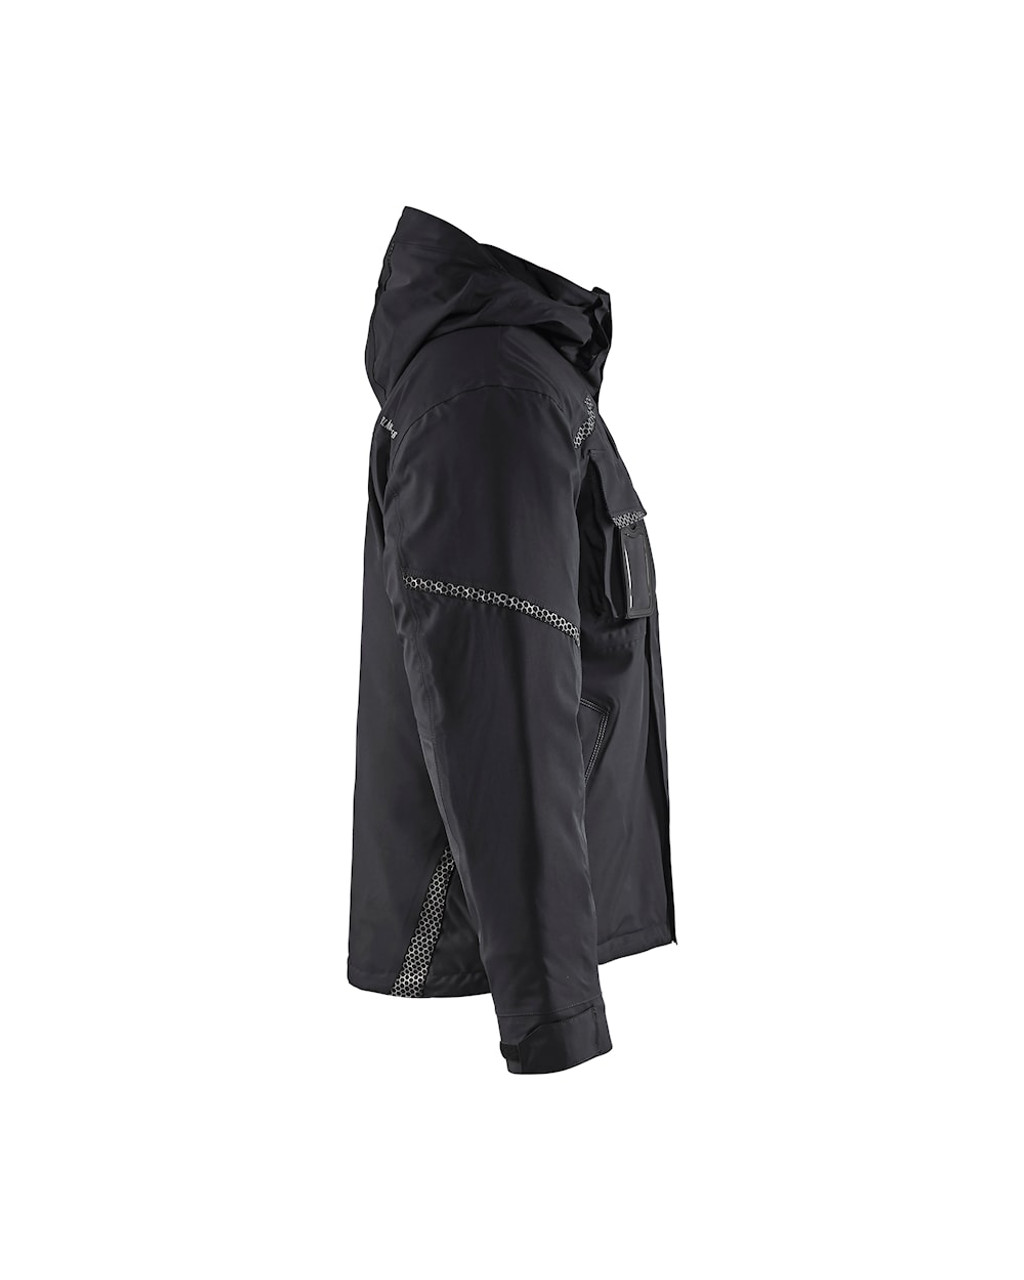 Buy online in Australia and New Zealand a Mens Black Jacket  for Electricians that are comfortable and durable.